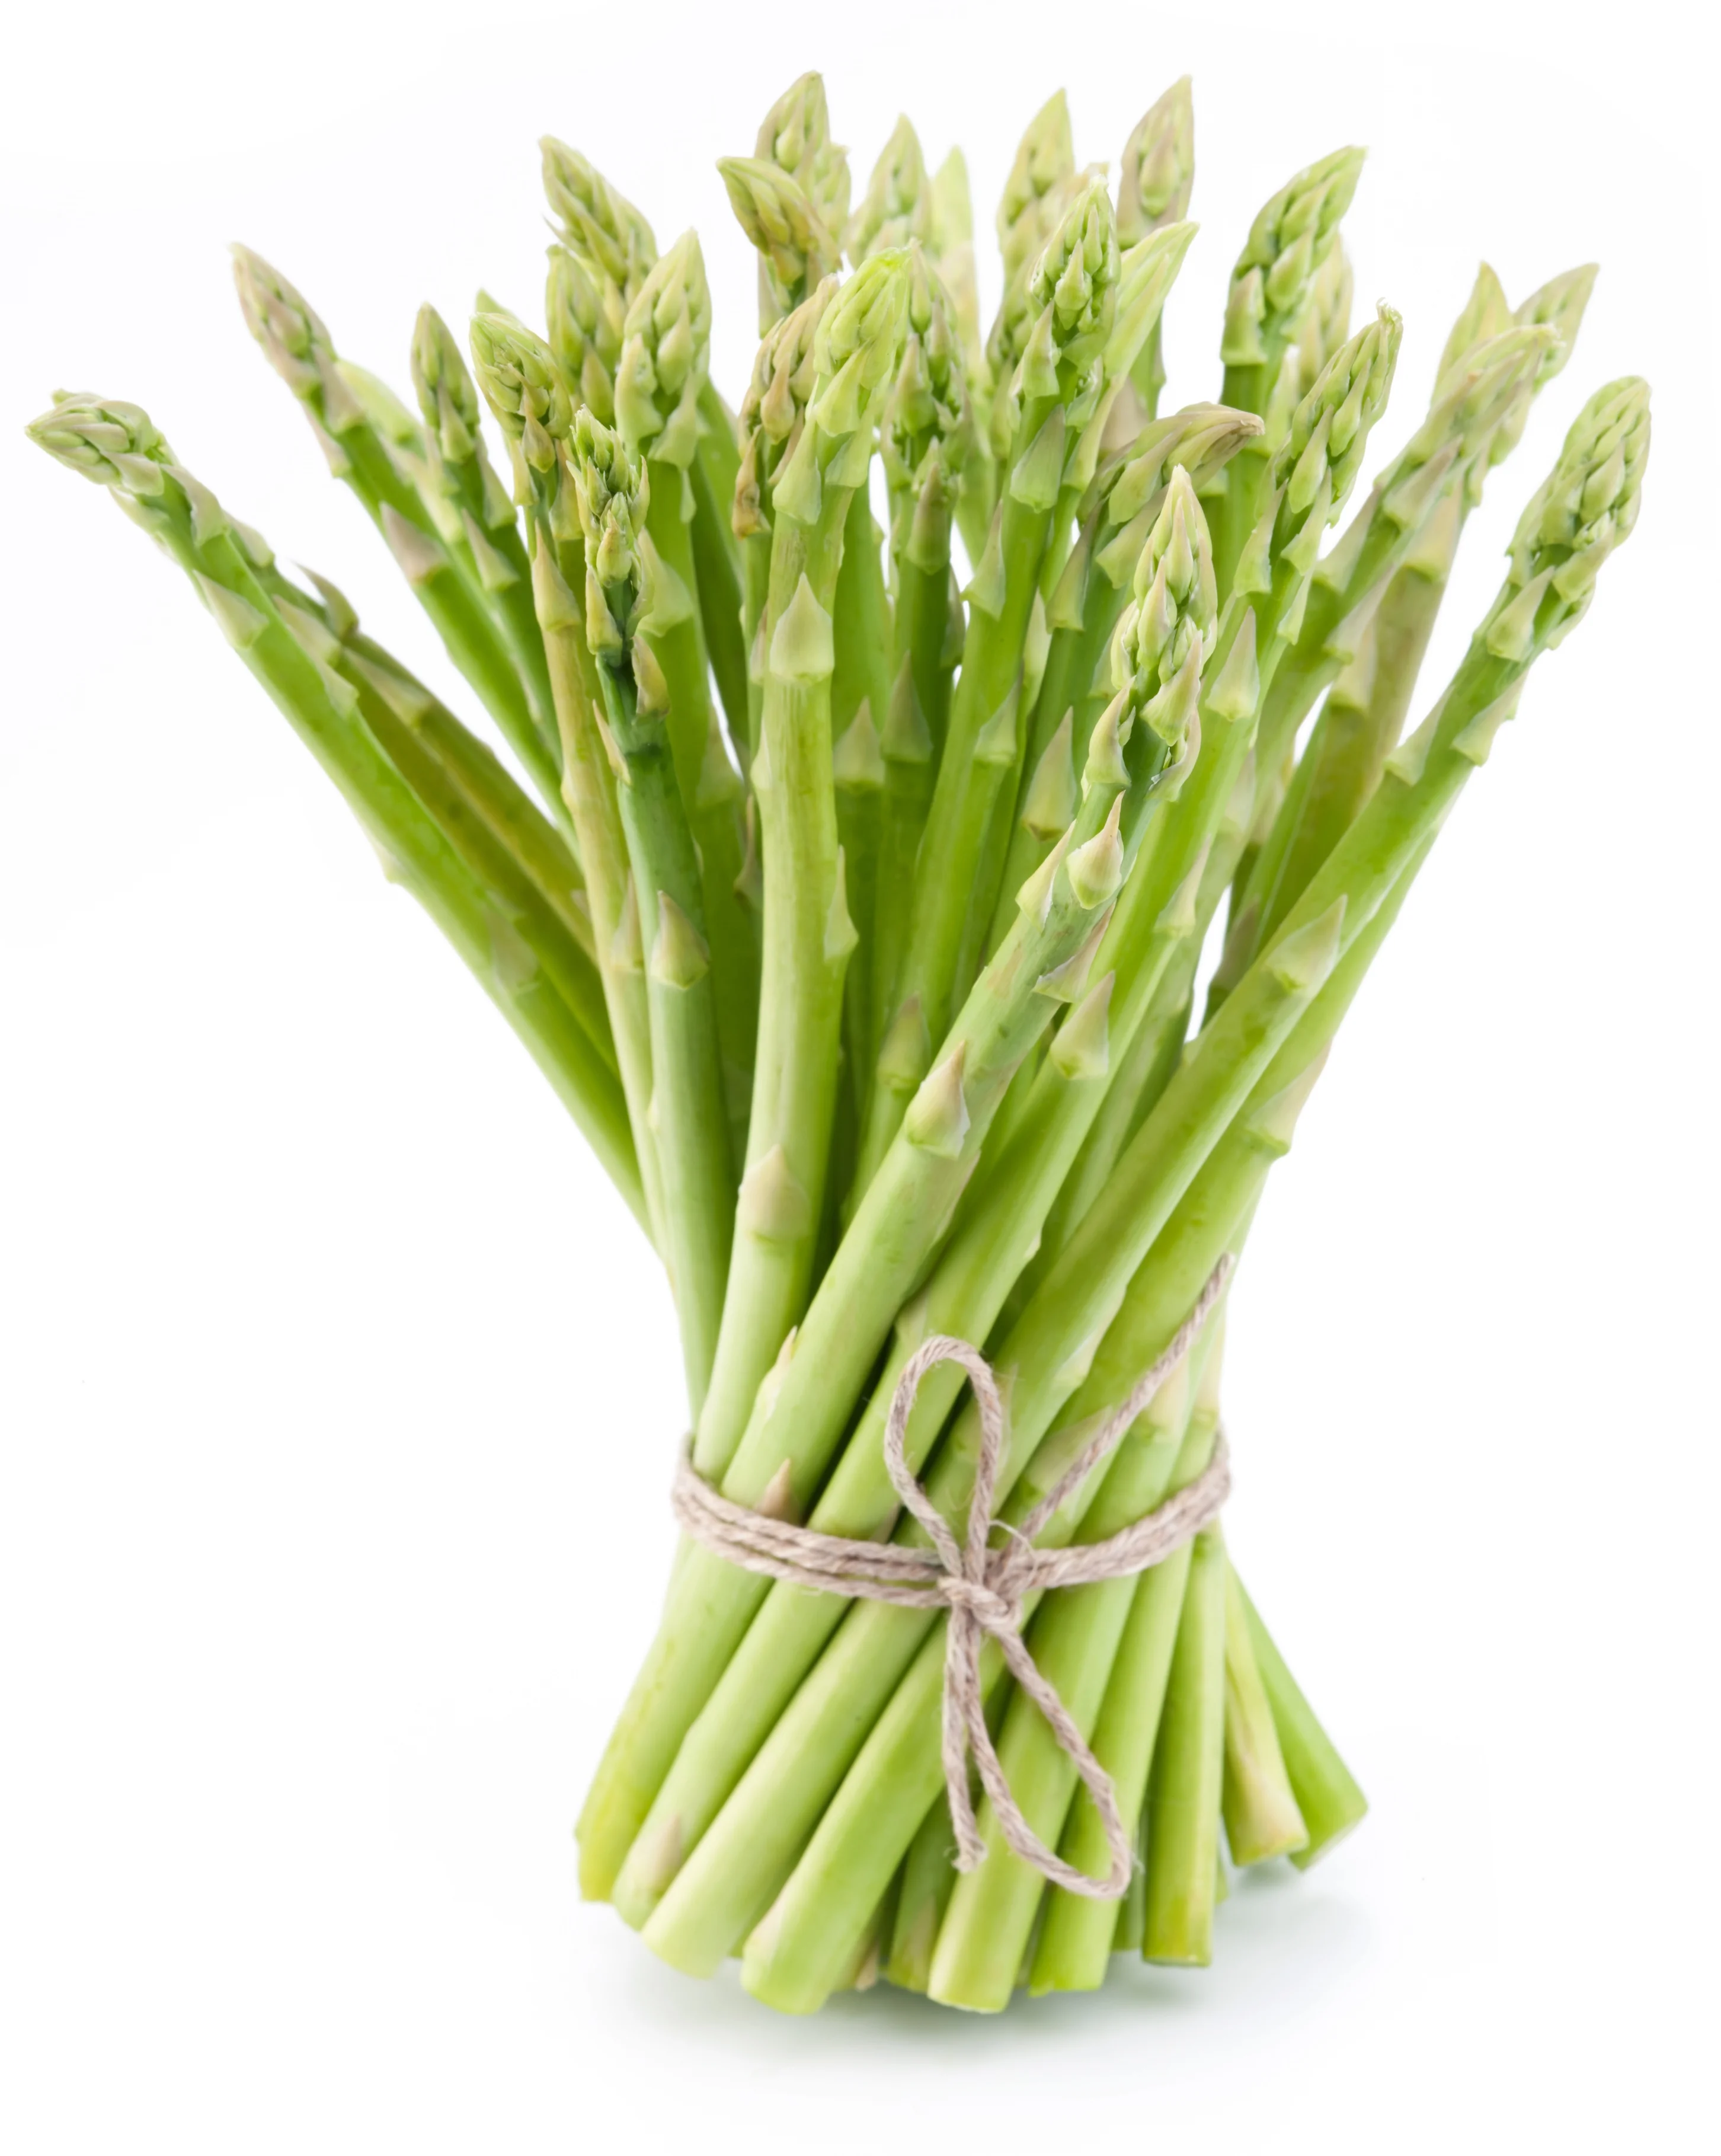 Peru Grown Green Vegetables Asparagus BUNCH Robinson Fresh MOQ 11 Lbs Quick Delivery in US